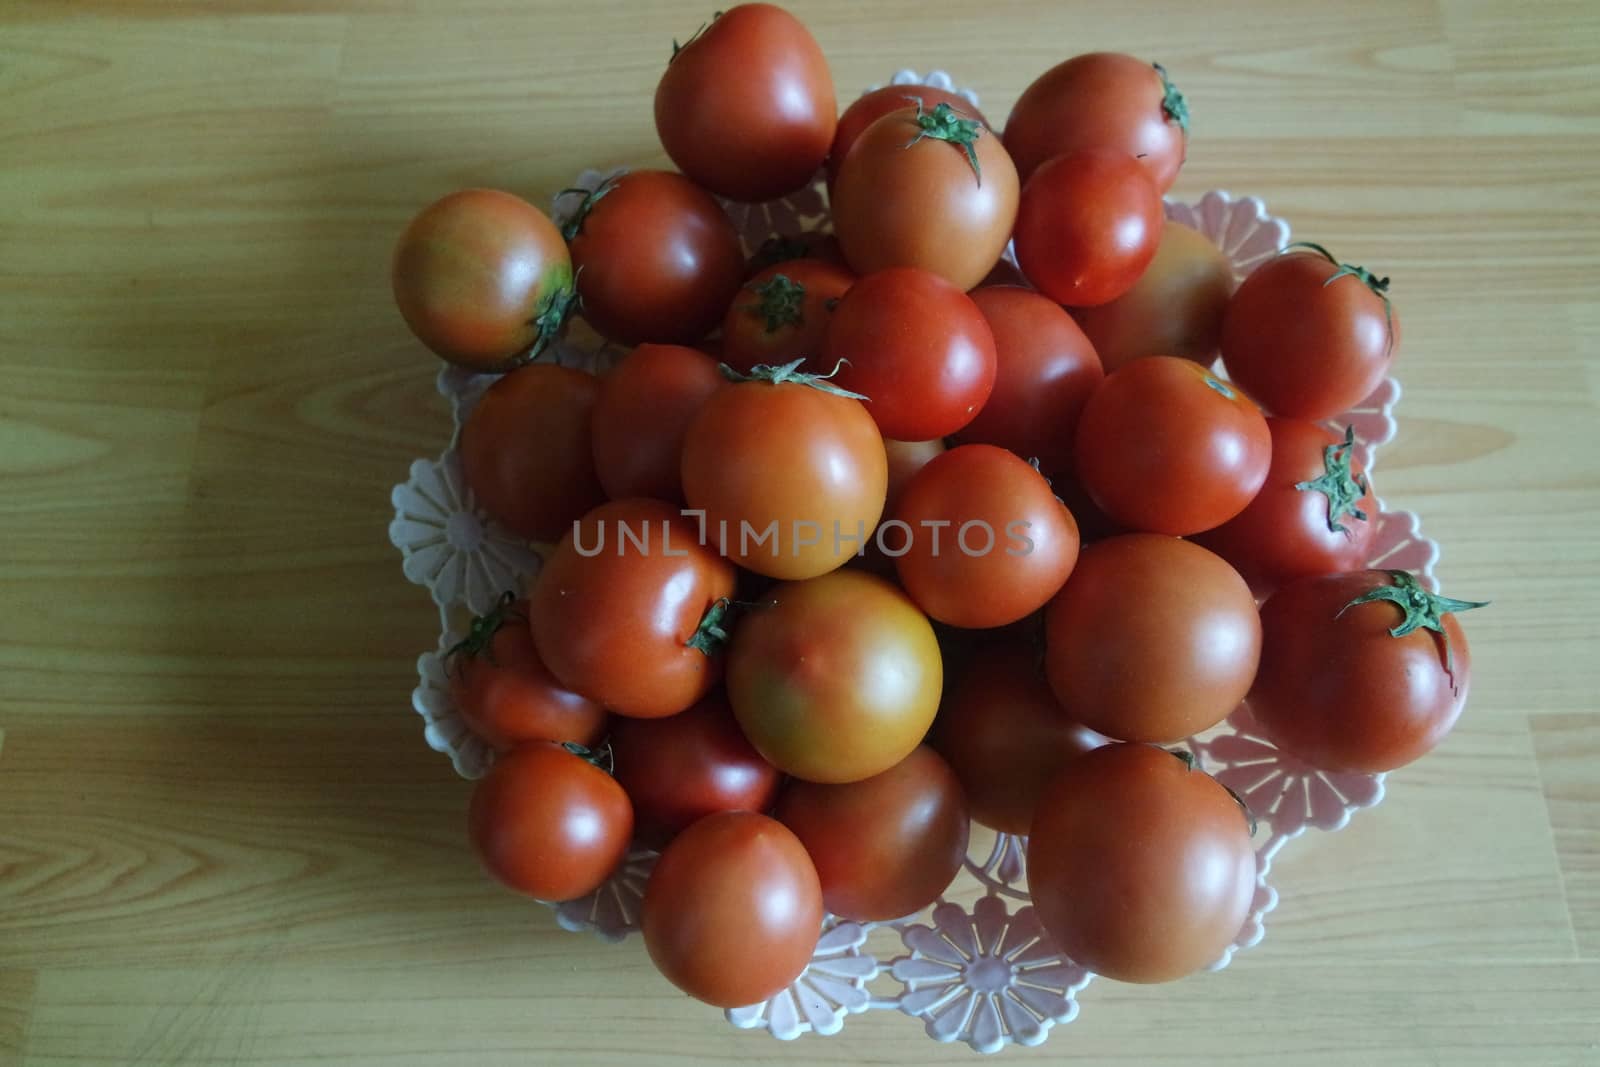 Close-up view of red tomatoes in white basket on a wooden floor in market by Photochowk